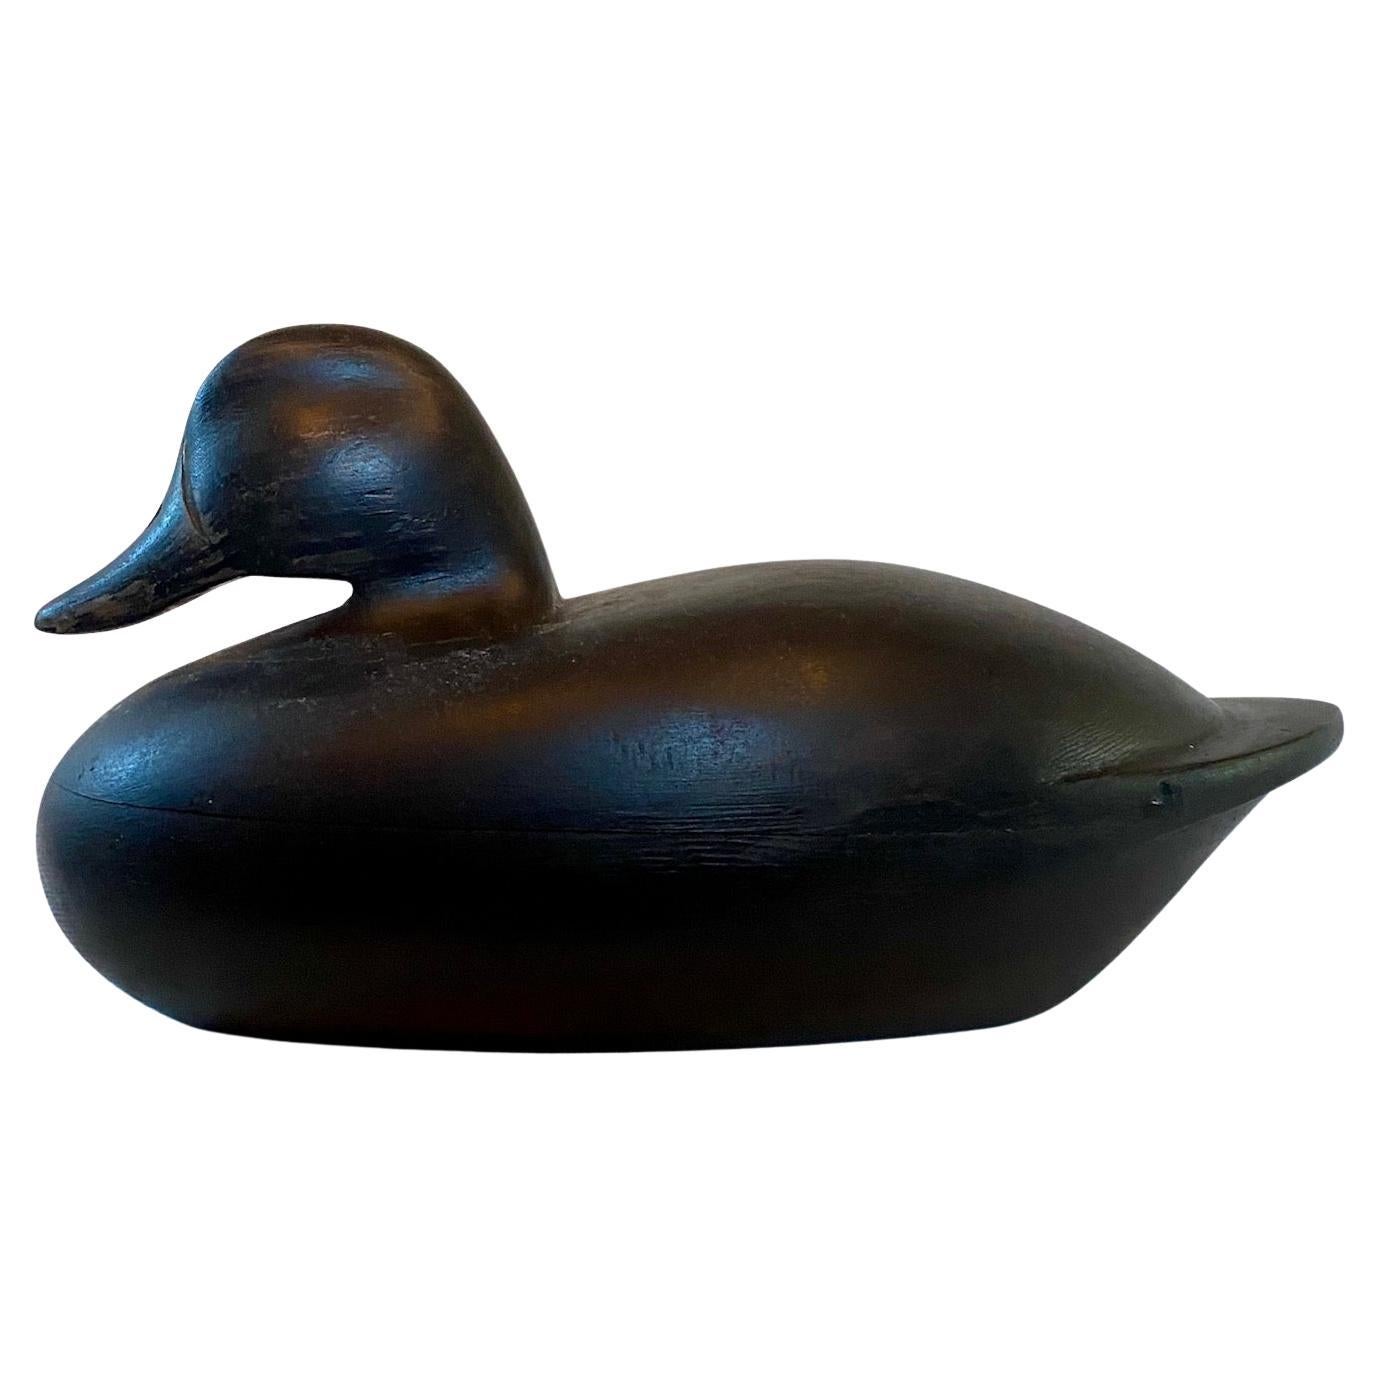 Carved and Painted Black Duck Decoy, by Pat Gardner, Nantucket, circa 1960s